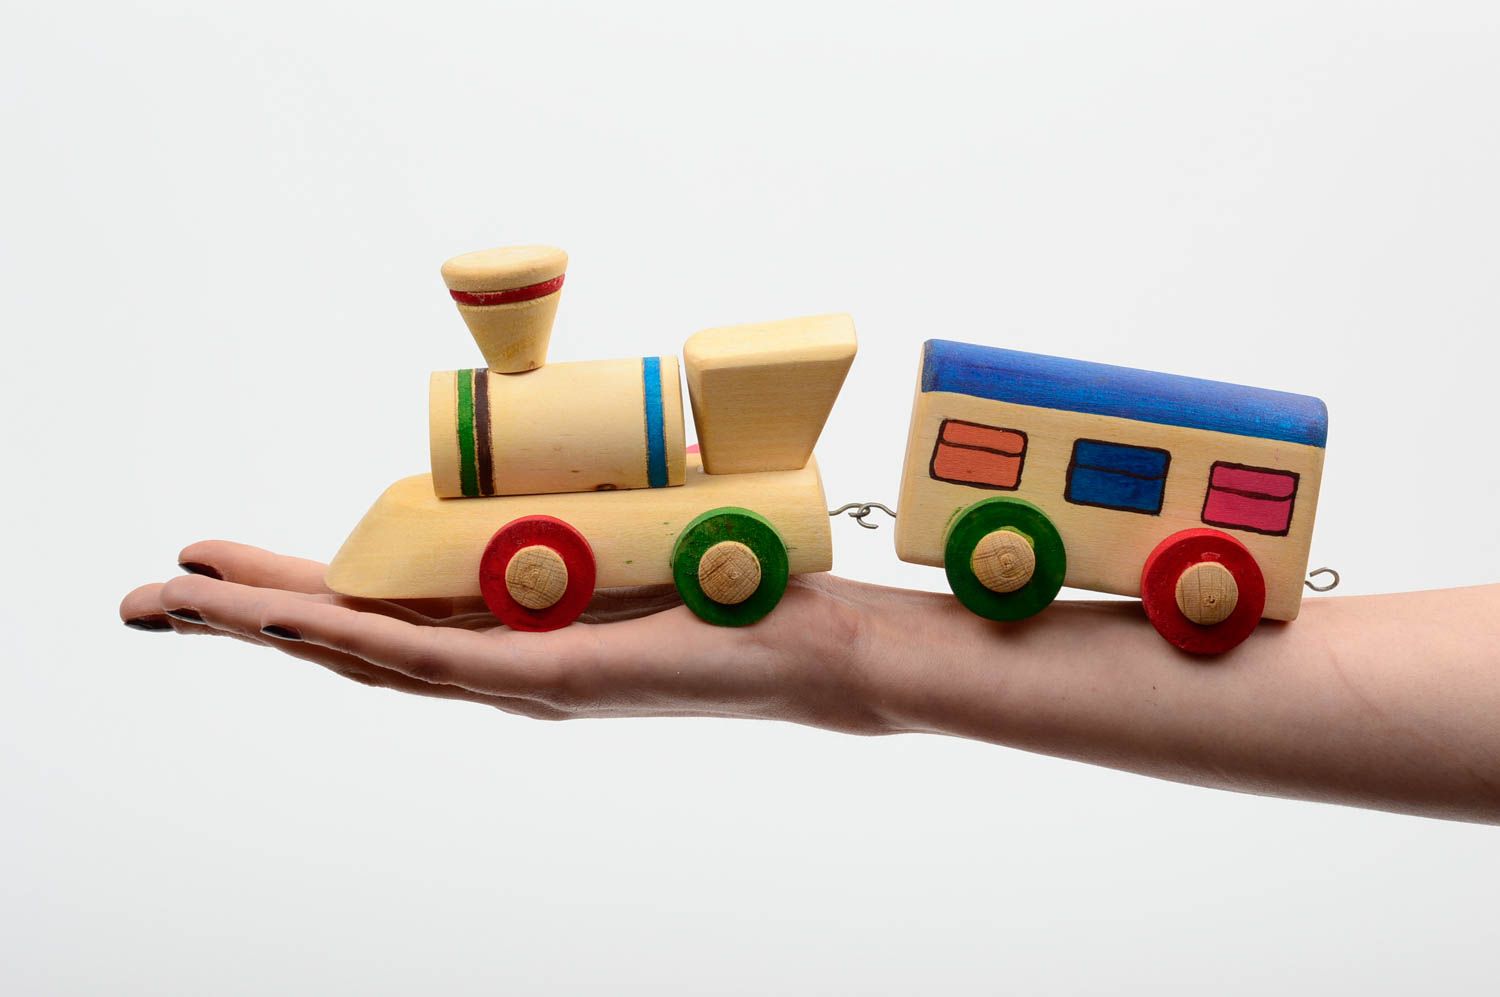 Toy train wooden toy handmade toy wooden gifts homemade home decor gifts for boy photo 5